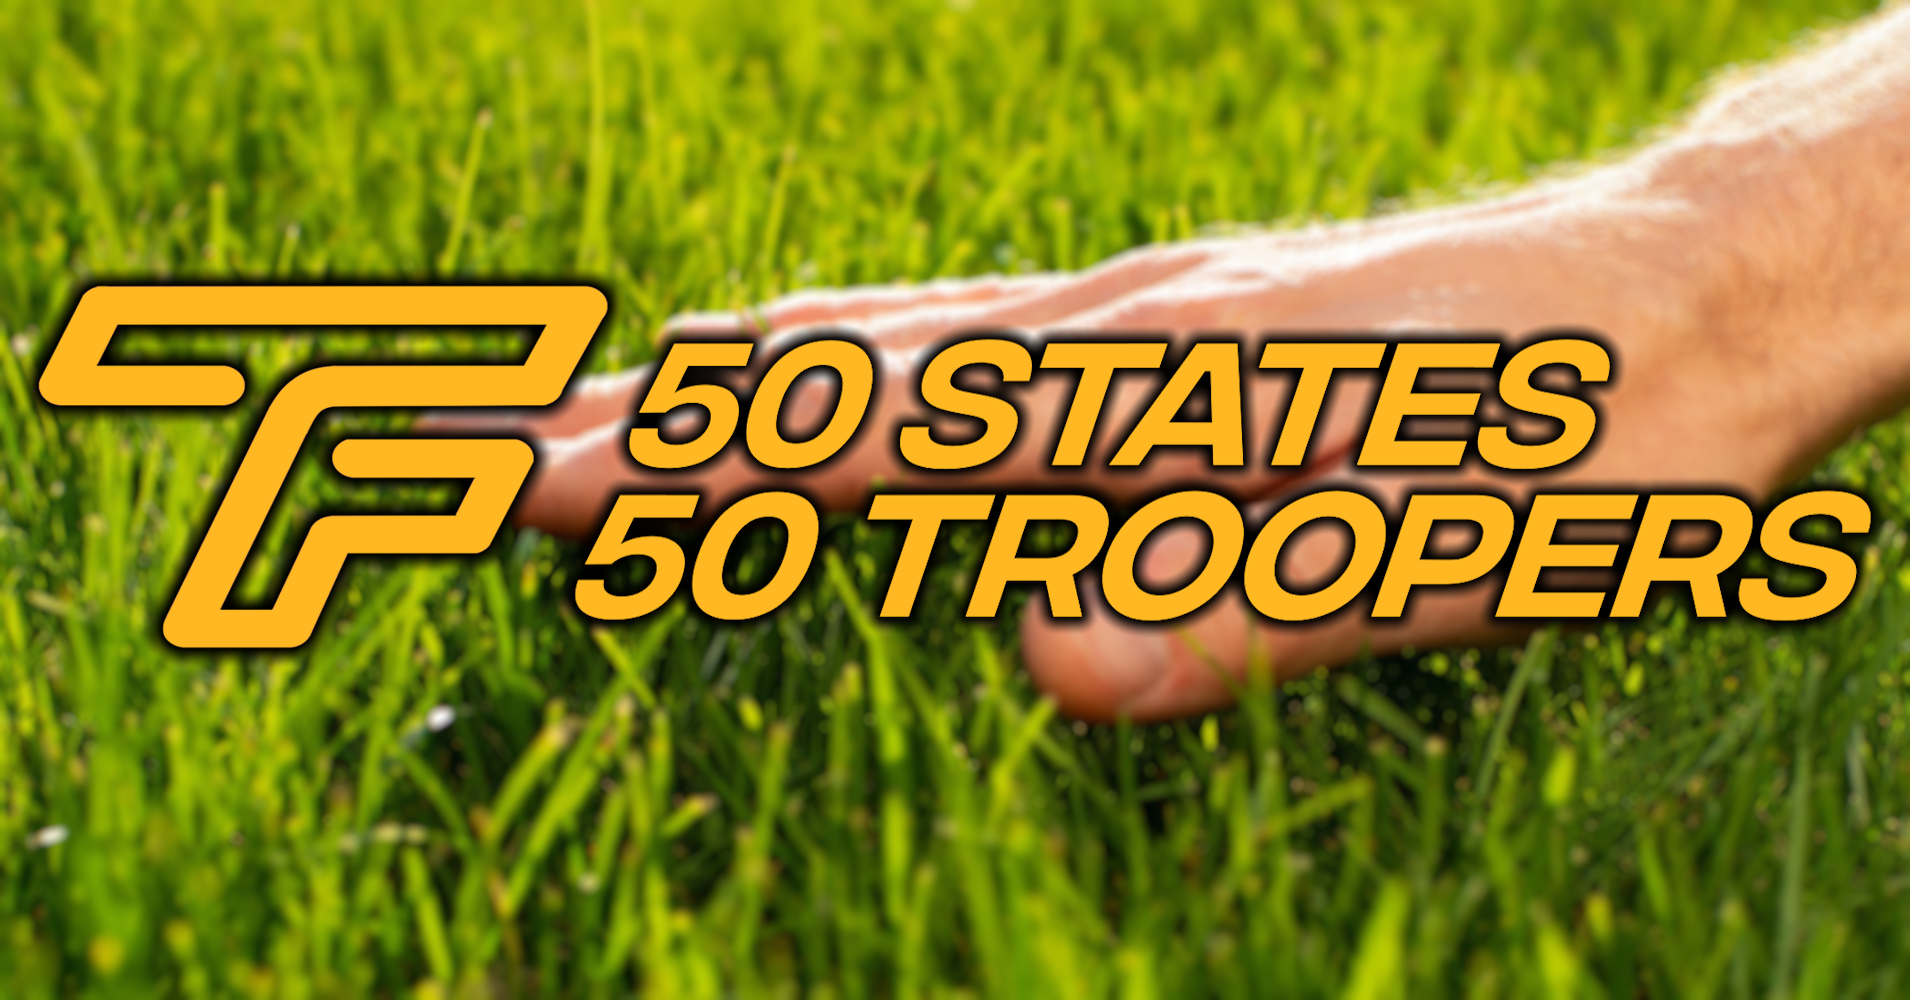 All 50 State Troopers